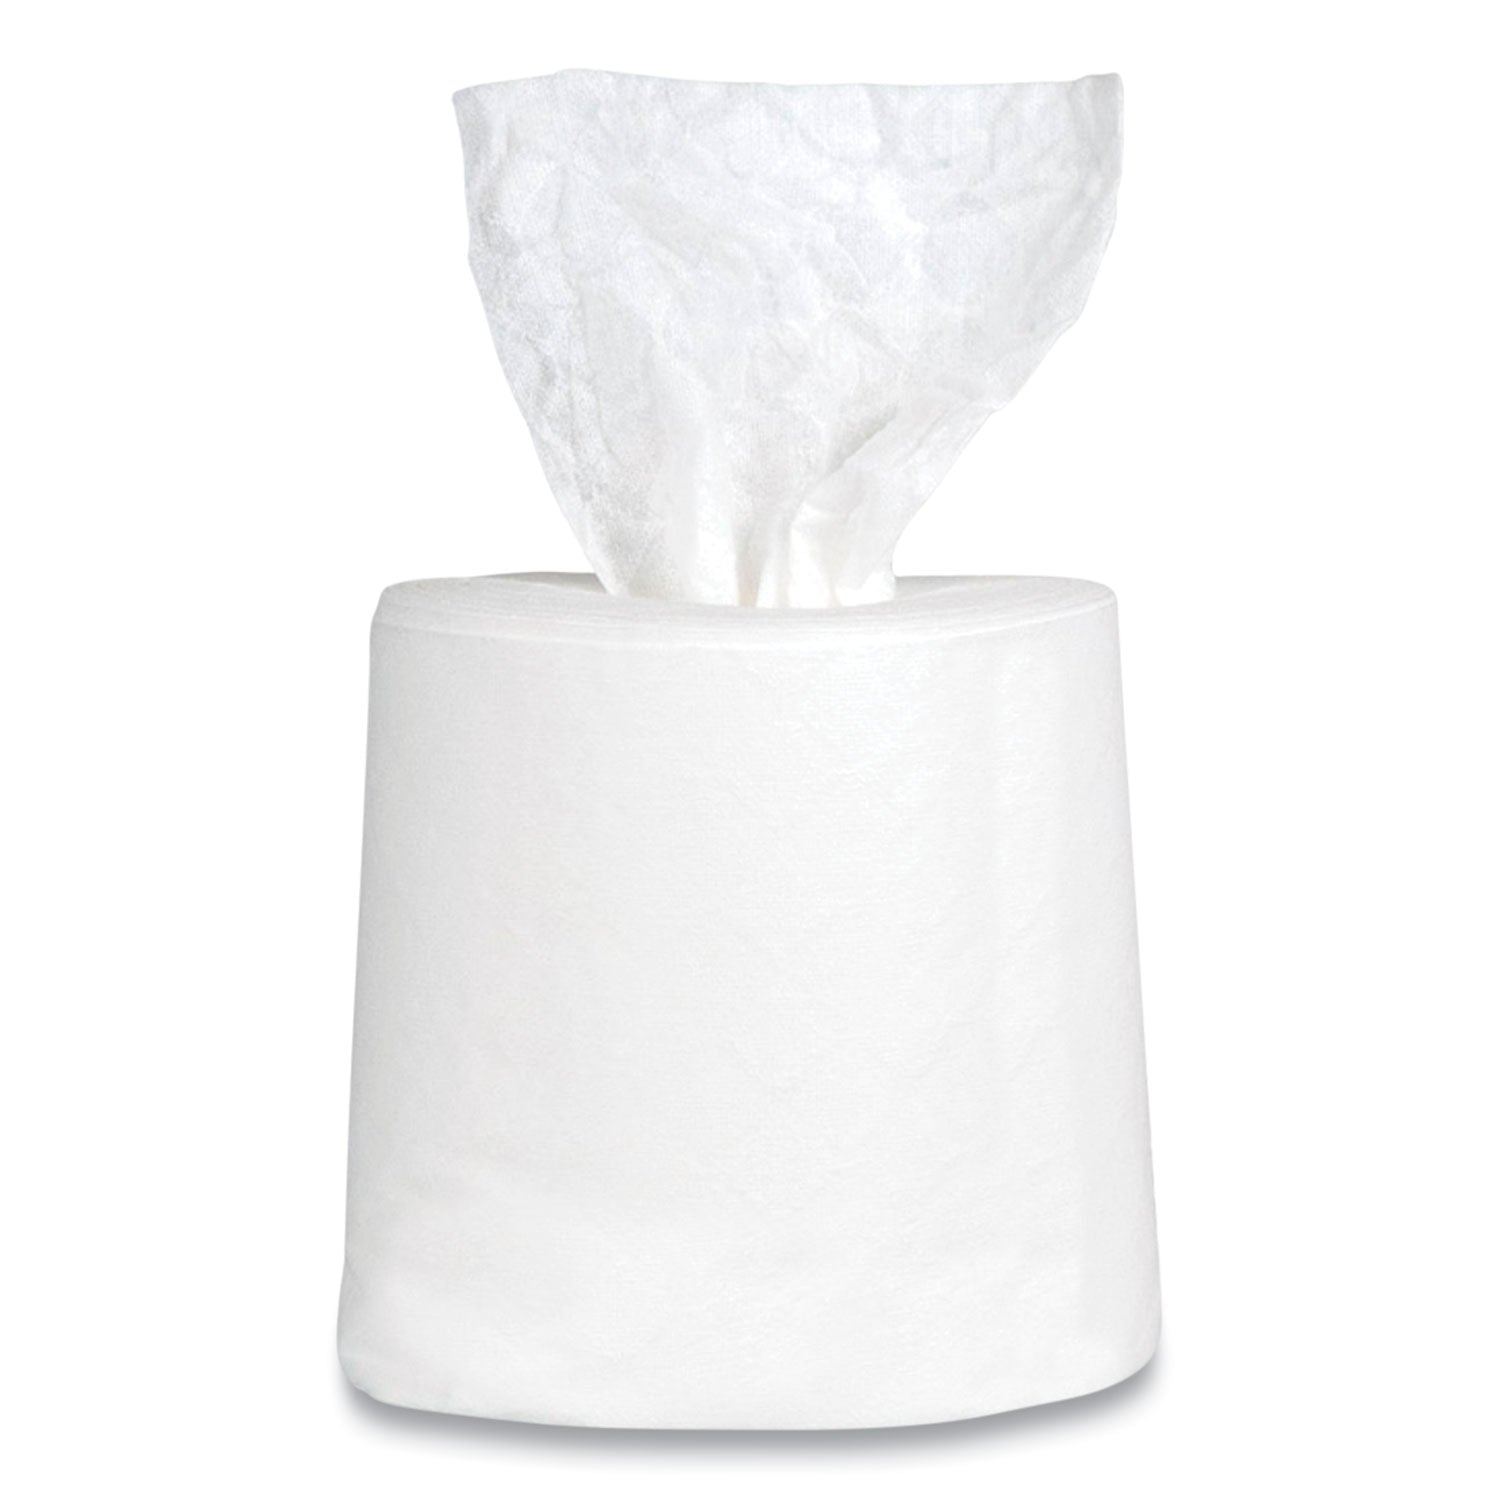 suds-single-use-dispensing-system-towels-for-quat-1-ply-10-x-12-unscented-white-110-roll-6-rolls-carton_chi0720 - 1